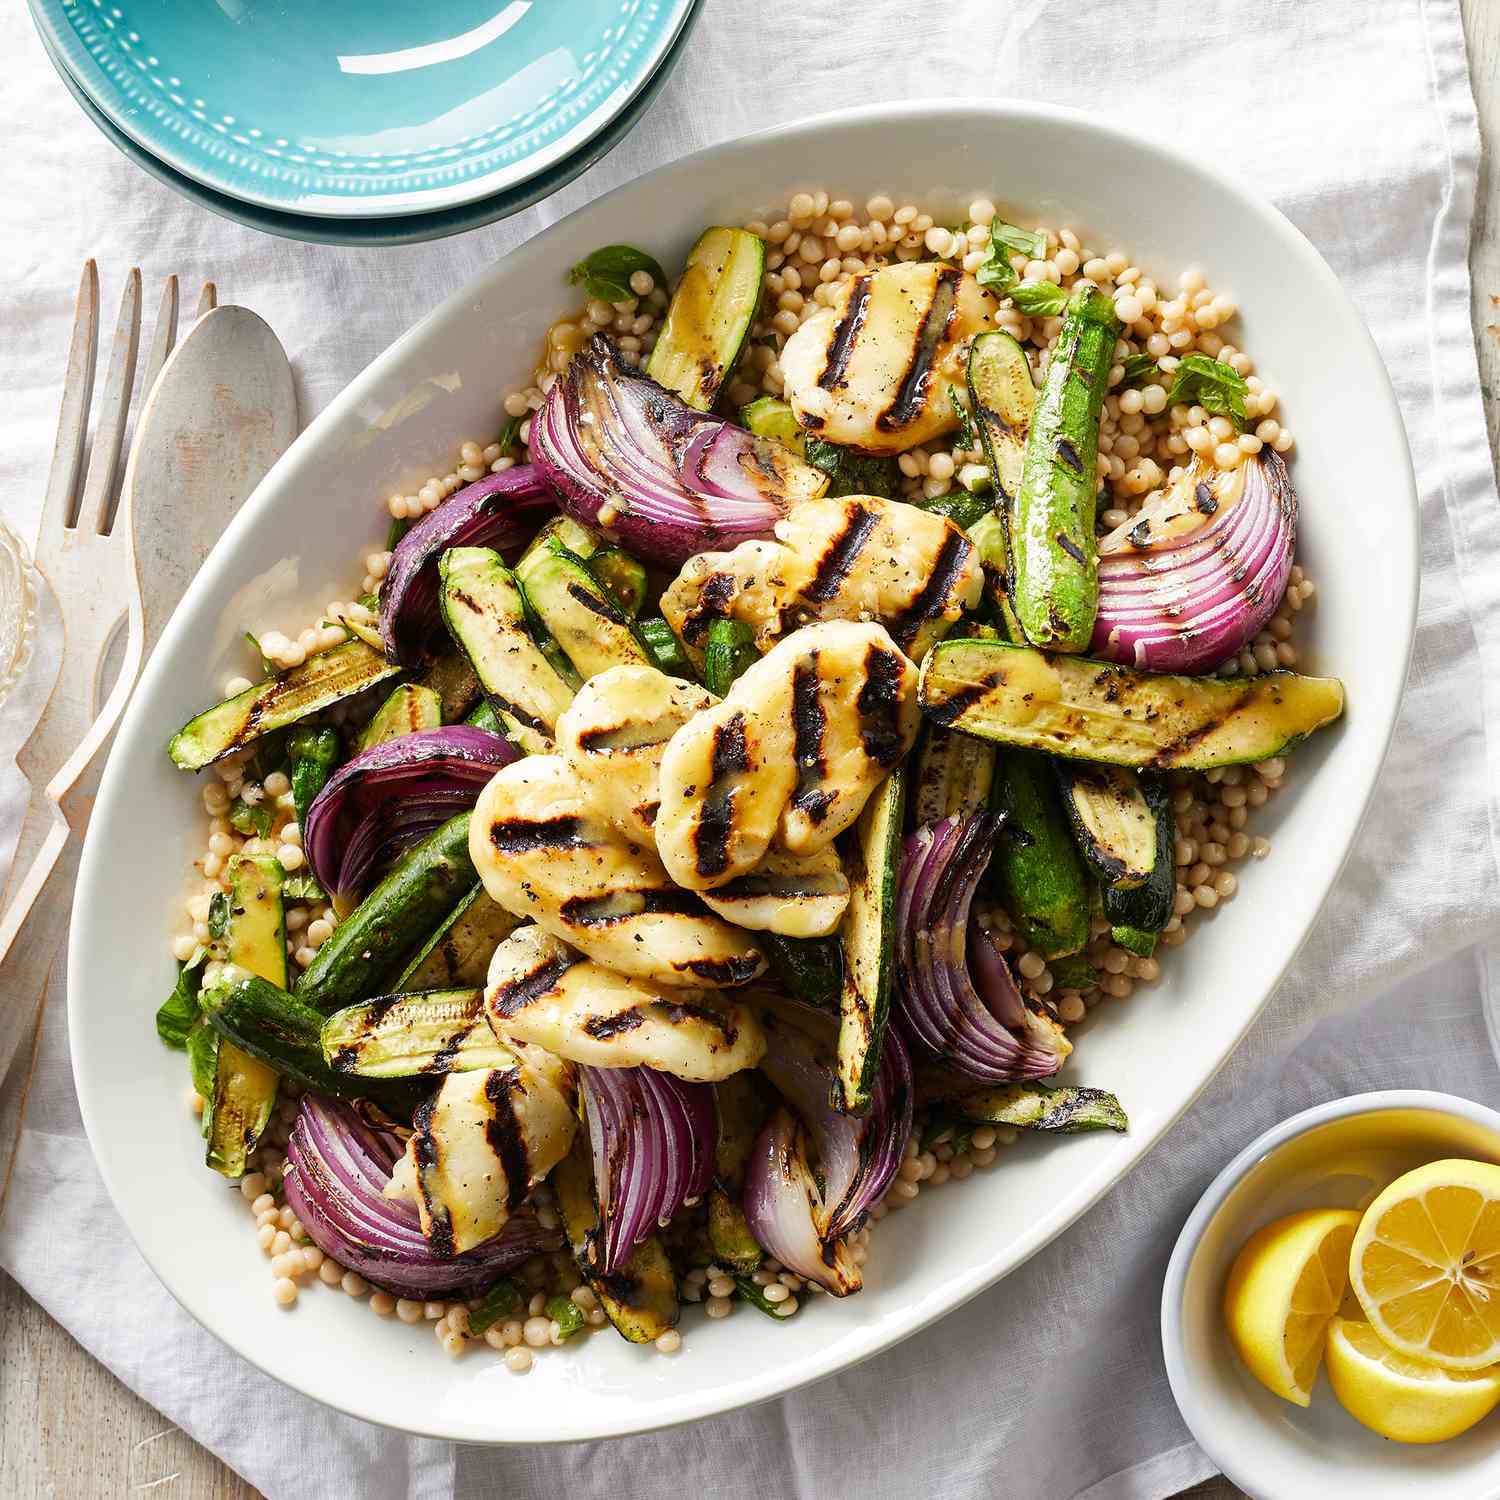 Grilled Zucchini & Halloumi with Herbed Couscous